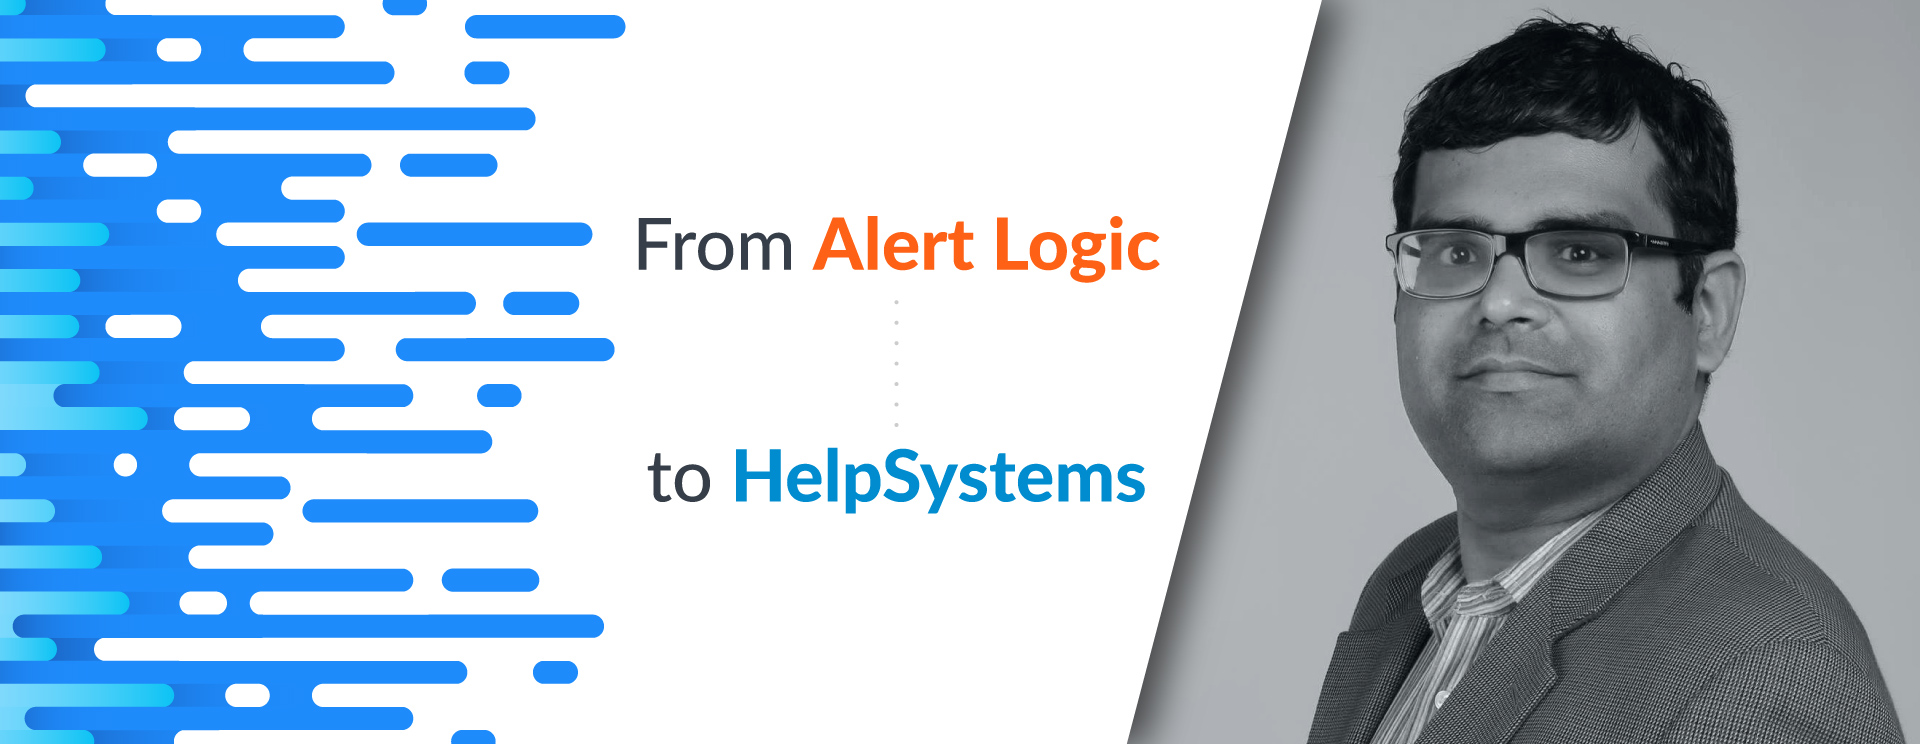 helpsystems acquisition of alert logic with Rohit Dhamankar